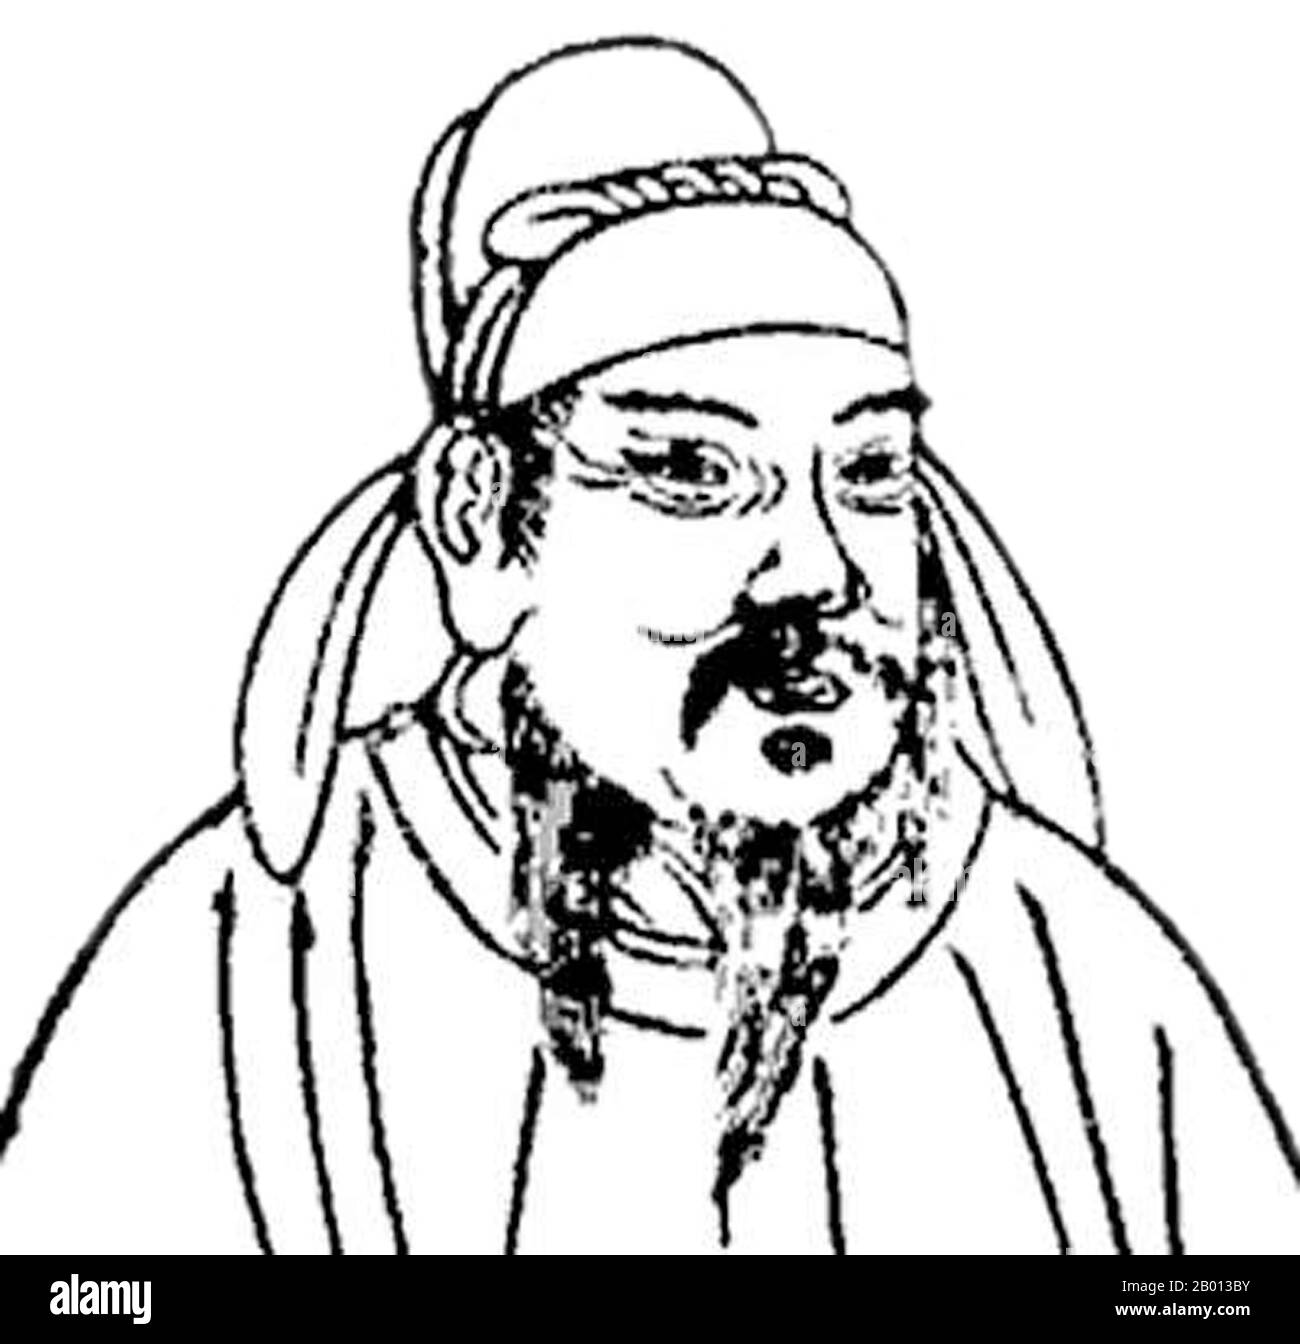 China: Emperor Zhongzong (Tang Lizhe, 26 November 656–3 July 710), 4th ruler of the Tang Dynasty (r. 684); and 6th ruler of the Tang Dynasty (705-710).  Emperor Zhongzong of Tang, personal name Li Xian, at times during his life Li Zhe and Wu Xian, was the fourth Emperor of the Tang Dynasty of China, ruling briefly in 684 and again from 705 to 710. Emperor Zhongzong was the son of Emperor Gaozong of Tang and Empress Wu (later known as Wu Zetian). He succeeded his father in 684. His mother, however, deposed him less than two months later in favor of his younger brother Emperor Ruizong. Stock Photo